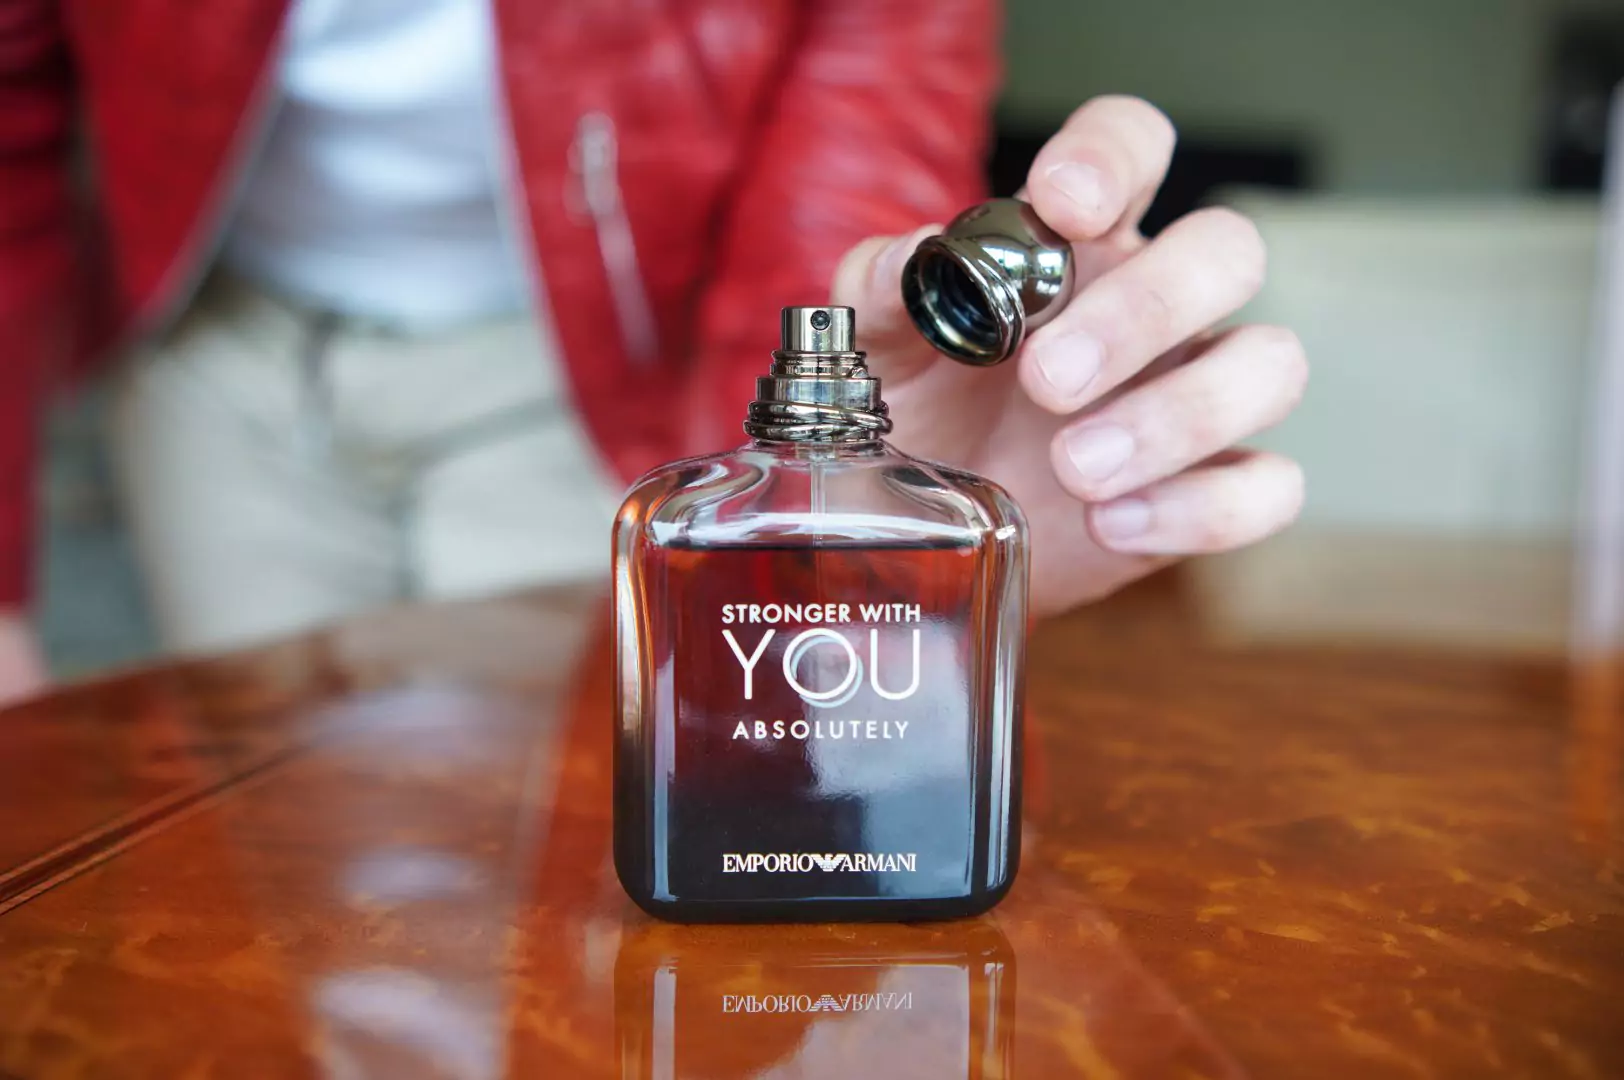 my-review-on-stronger-with-you-absolutely-by-armani